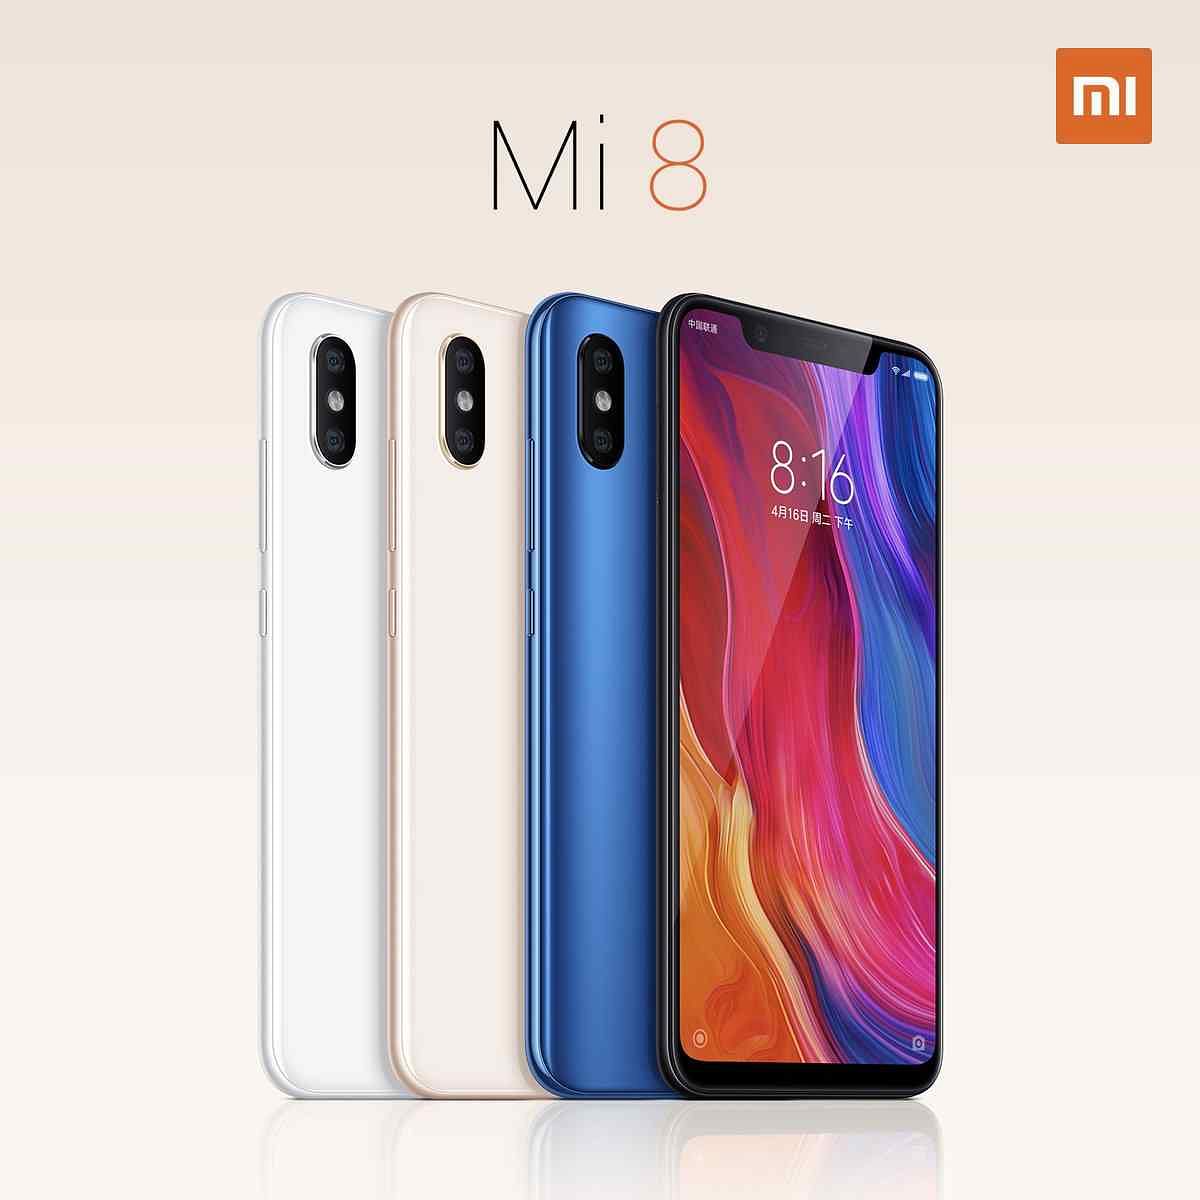 After announcing its sub-brand, POCO, Xiaomi might bring its flagship Mi 8 to India in the coming weeks. 